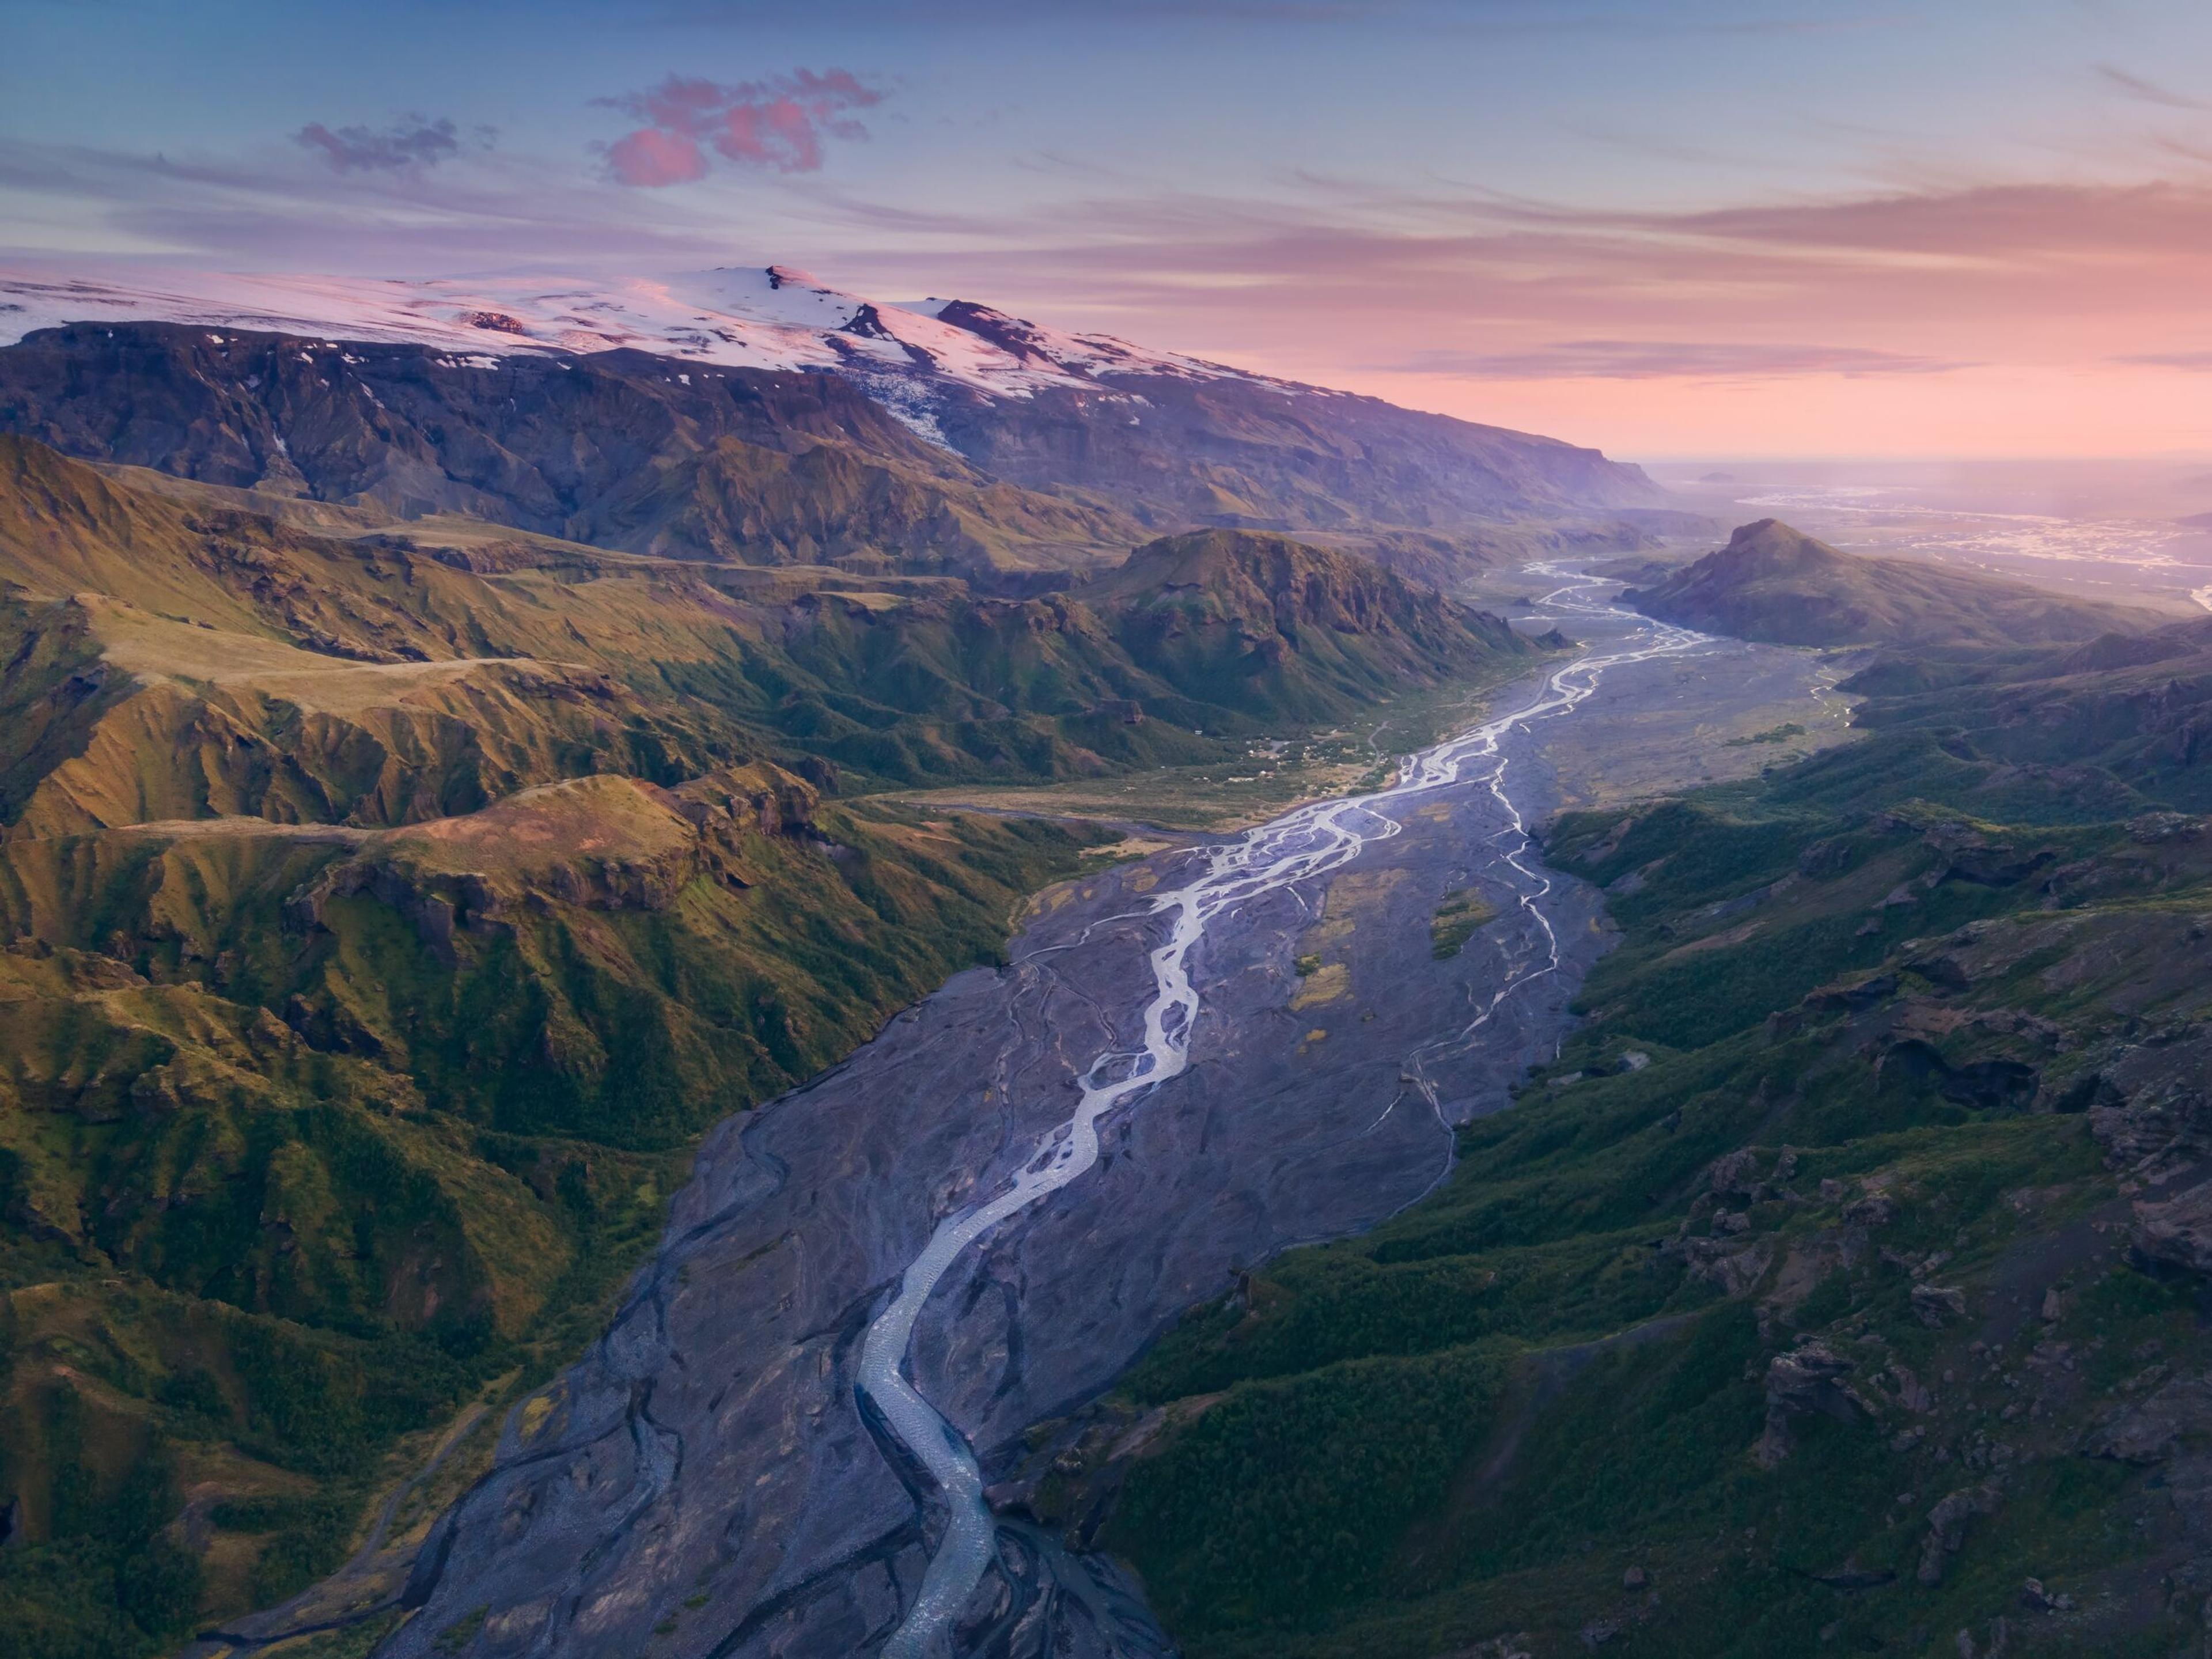 Spectacular river valley flanked by craggy hills, with a distant glacier, all bathed in the soft pink hues of sunset.